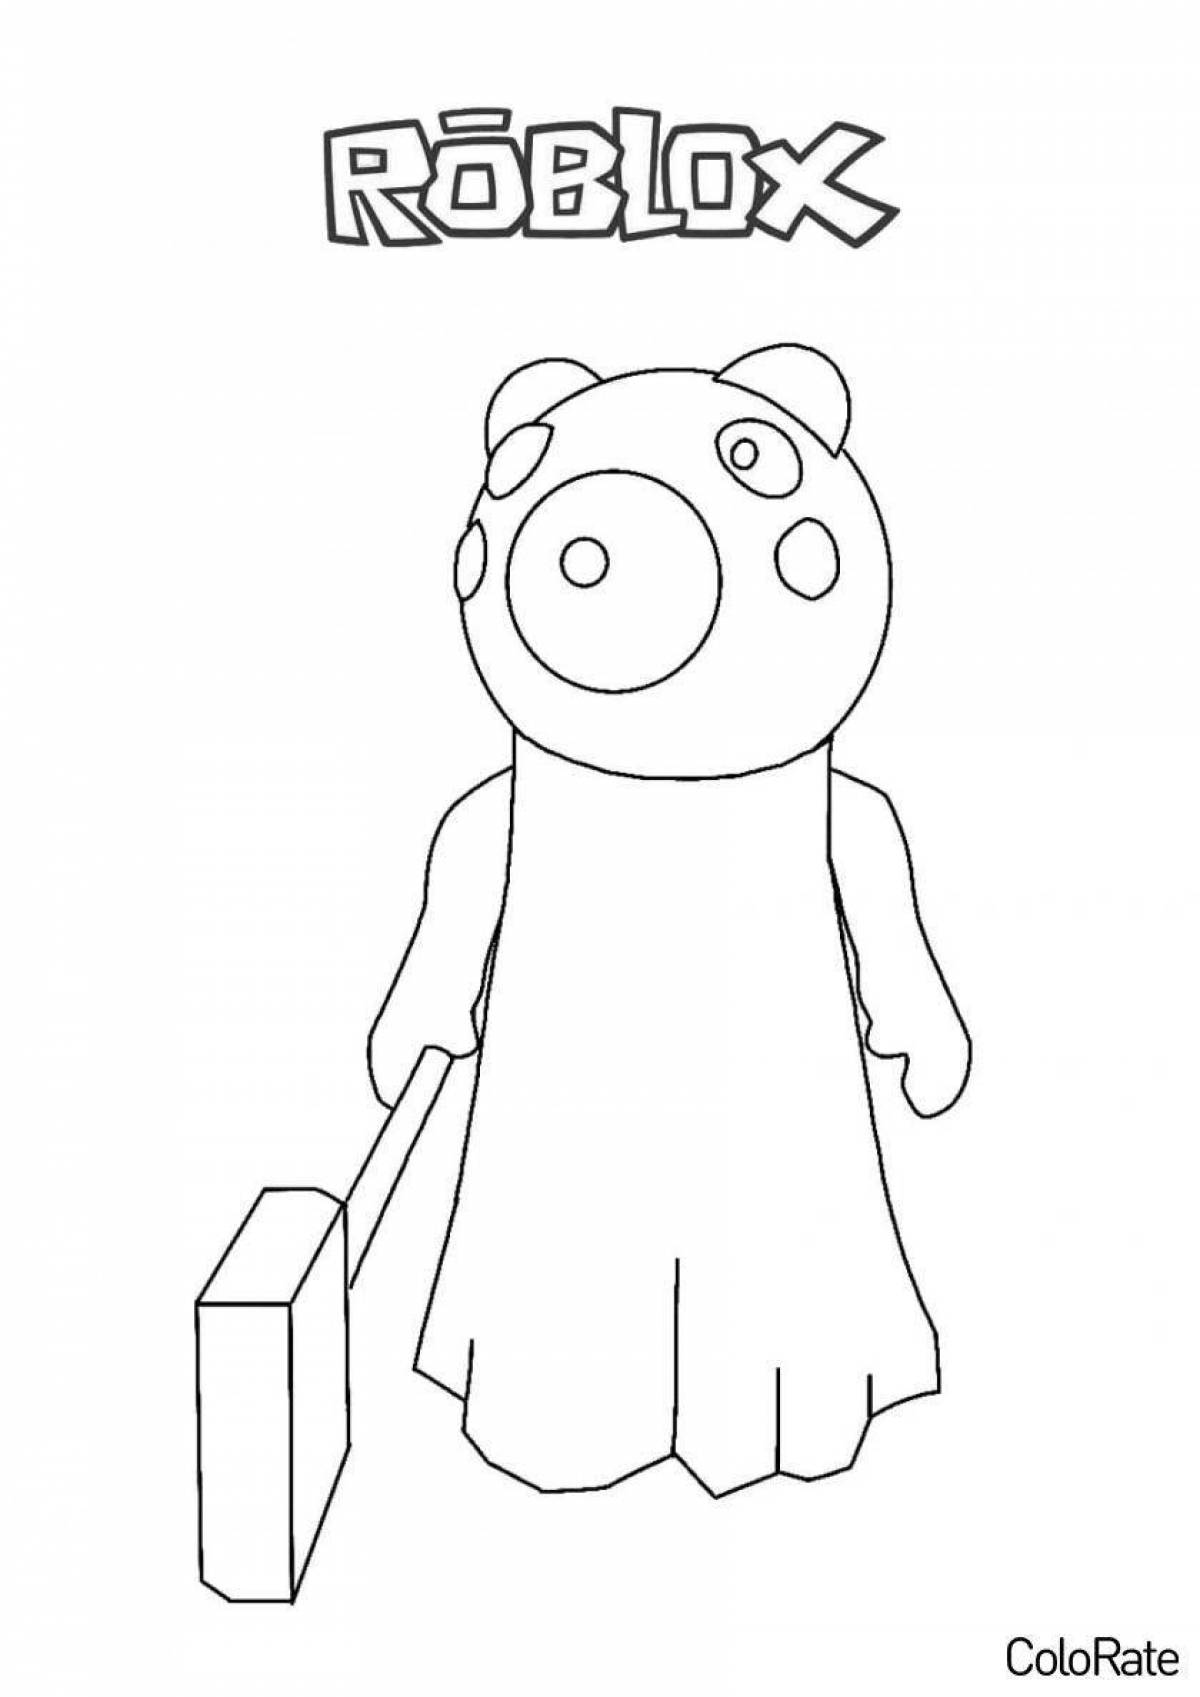 Colorful roblox piggy coloring page